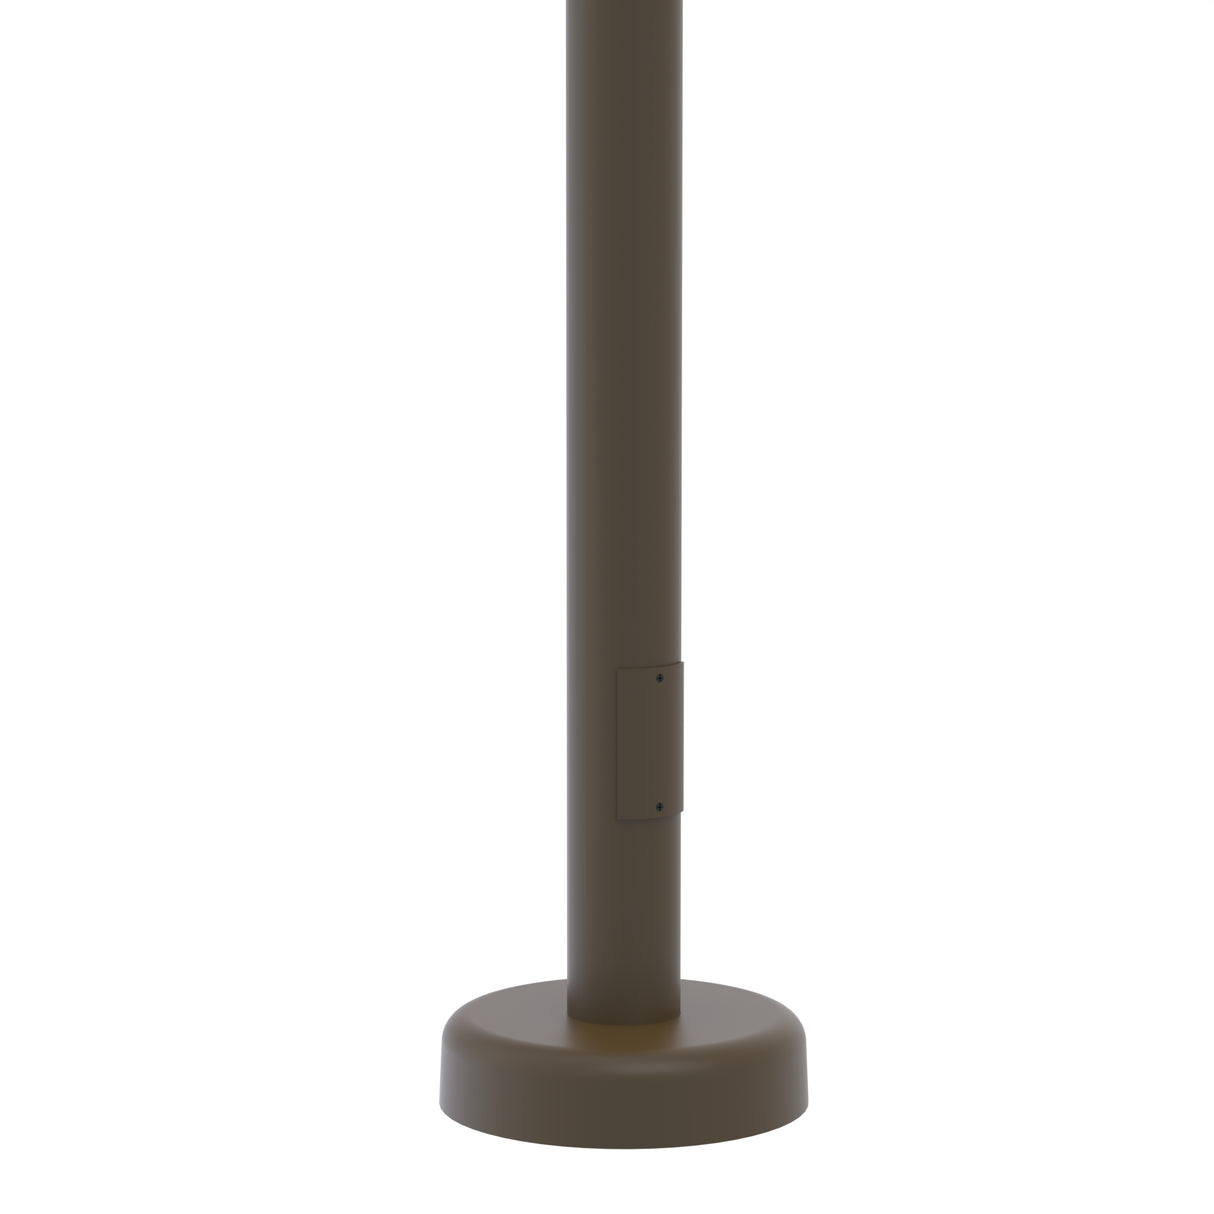 20' Tall x 5.0" Base OD x 3.0" Top OD x 0.156" Thick, Round Tapered Aluminum, Hinged Anchor Base Light Pole